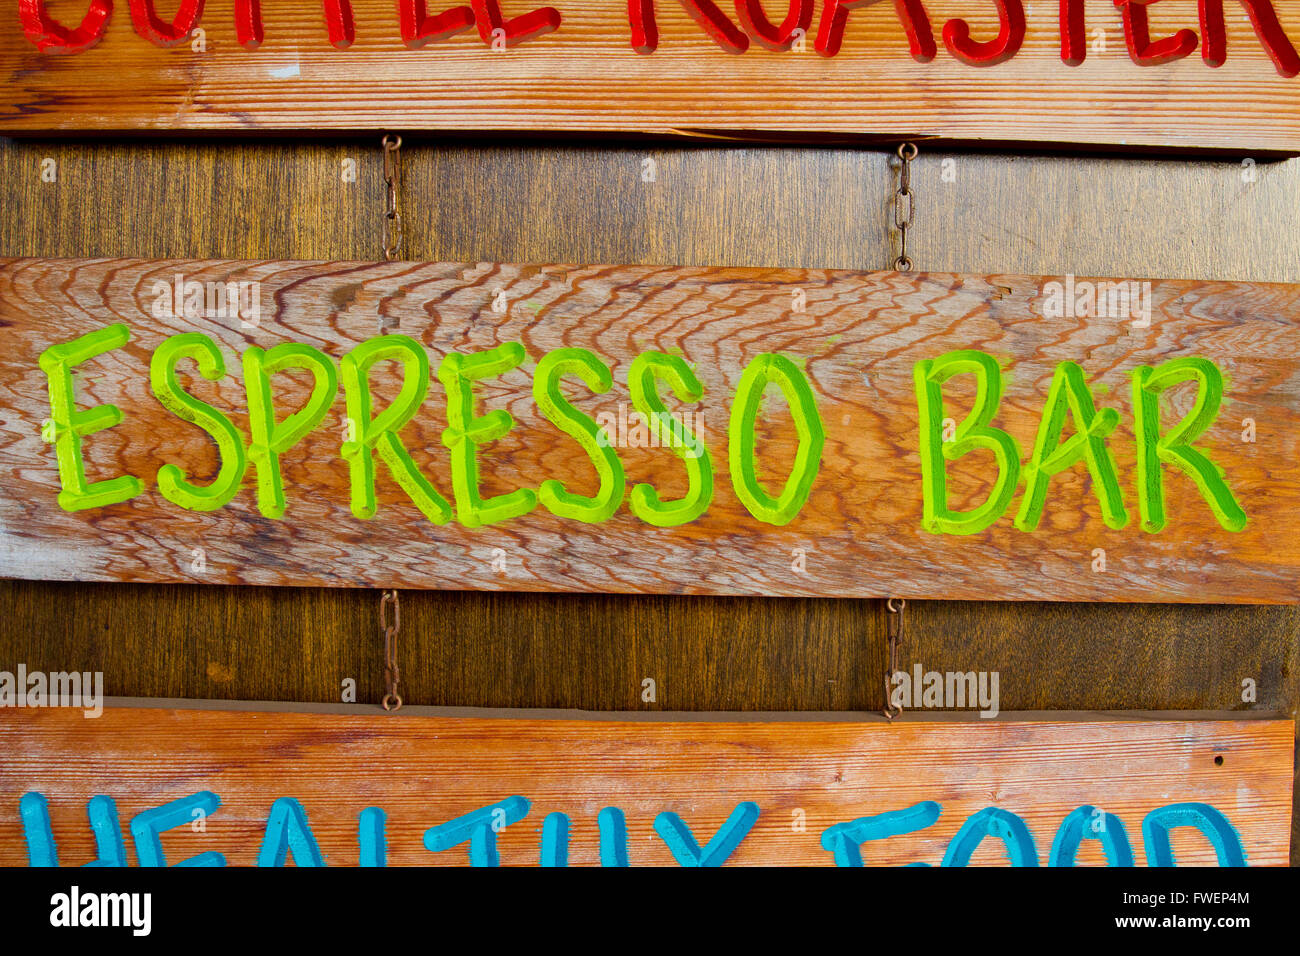 A handmade wood sign on a wood background is carved out and painted showing the words espresso bar in green letters. Stock Photo